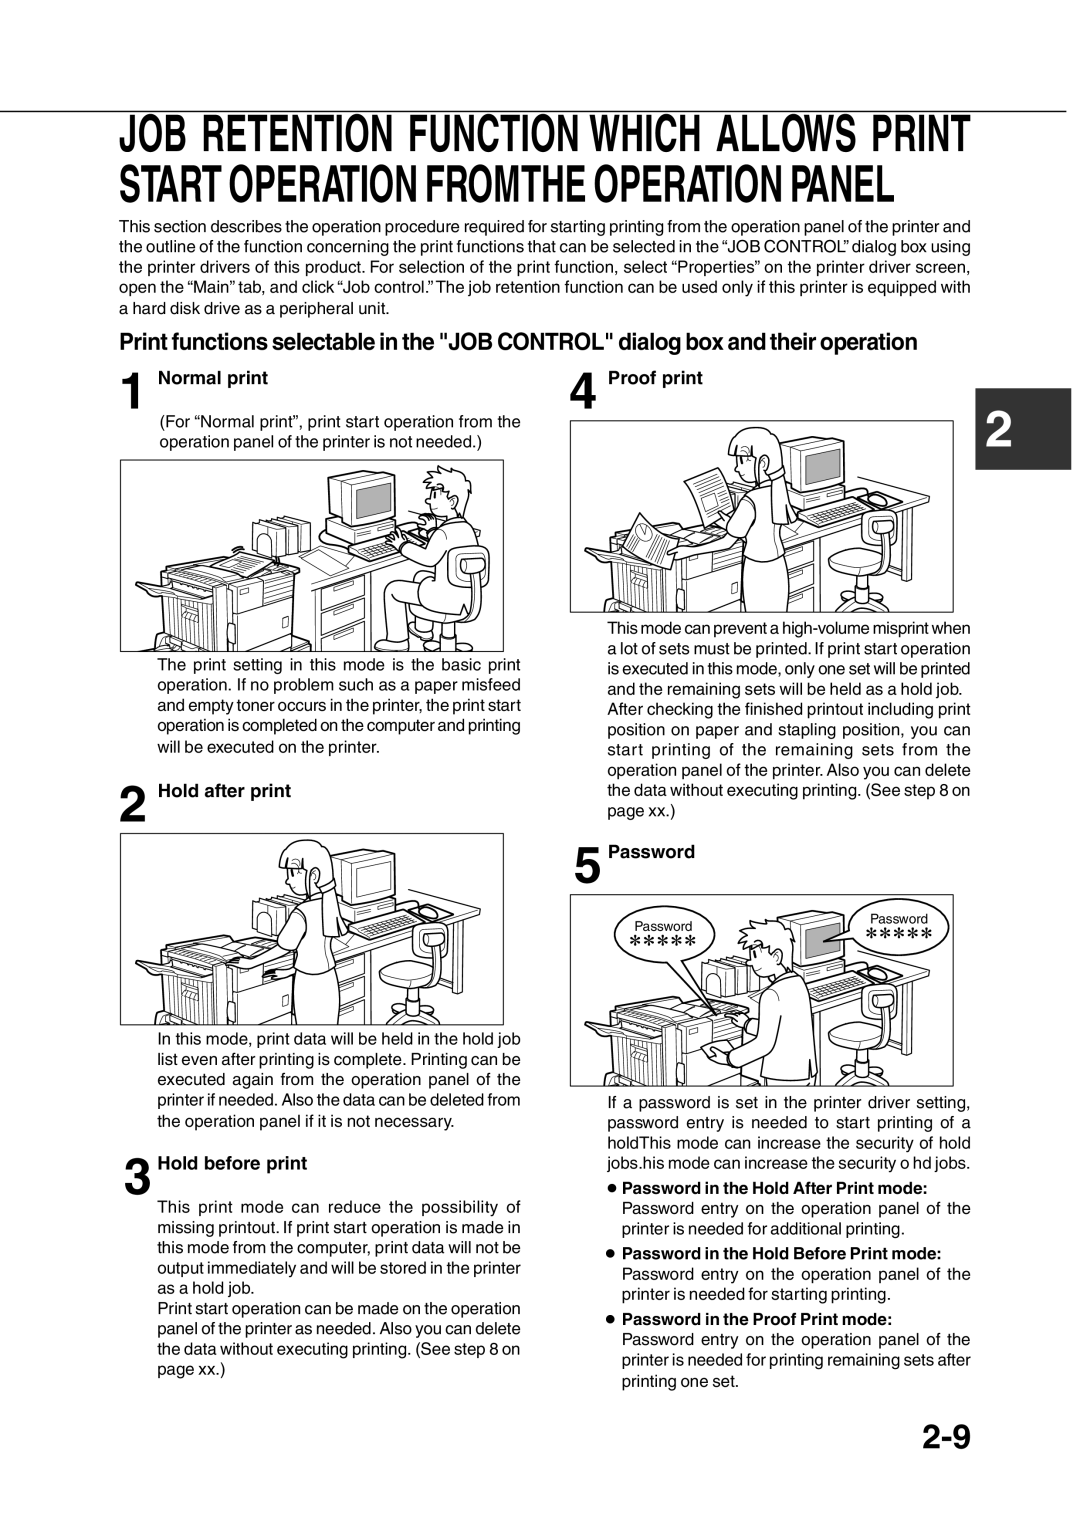 Sharp AR-350, AR_M280 operation manual Normal print, Hold before print, Password, Hold after print, Proof print 